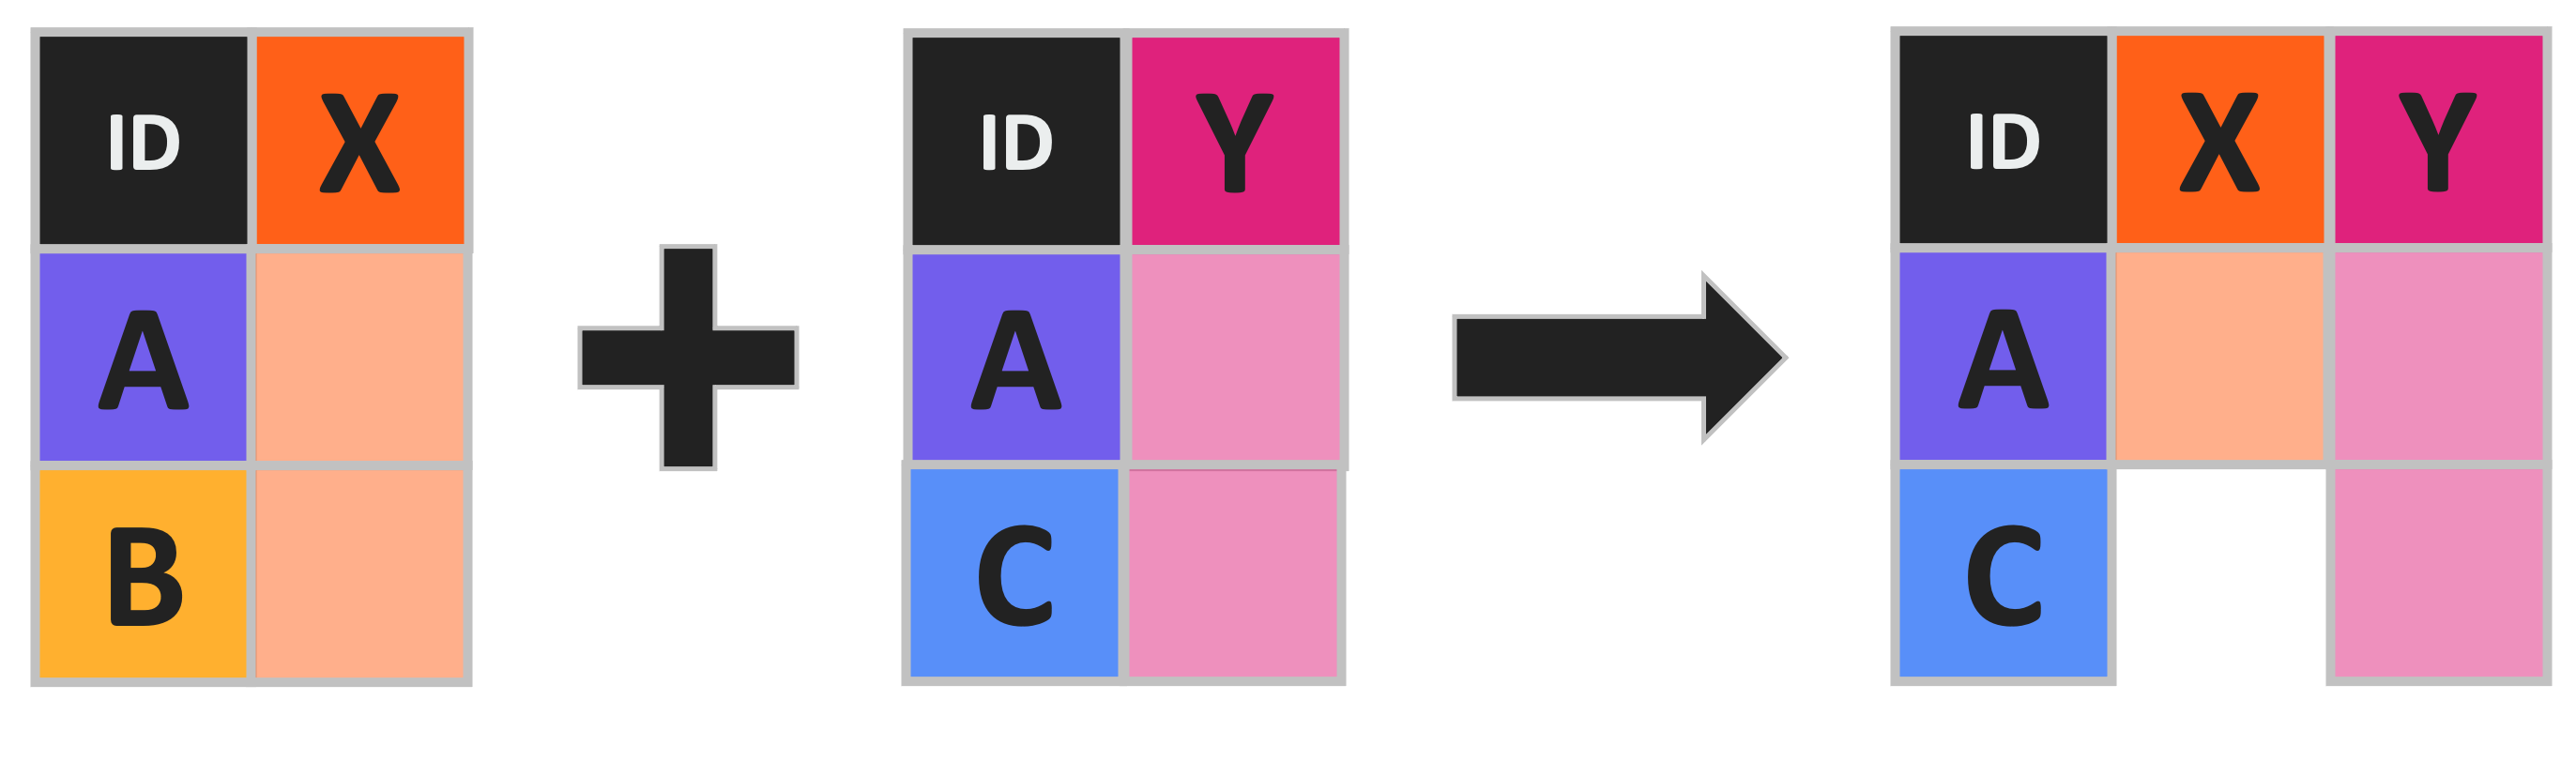 Table with an 'X' column and 'A' and 'B' rows gets joined with a second table with a 'Y' column and 'A' and 'C' rows to produce a single table with 'X' and Y' columns and 'A' and 'C' rows